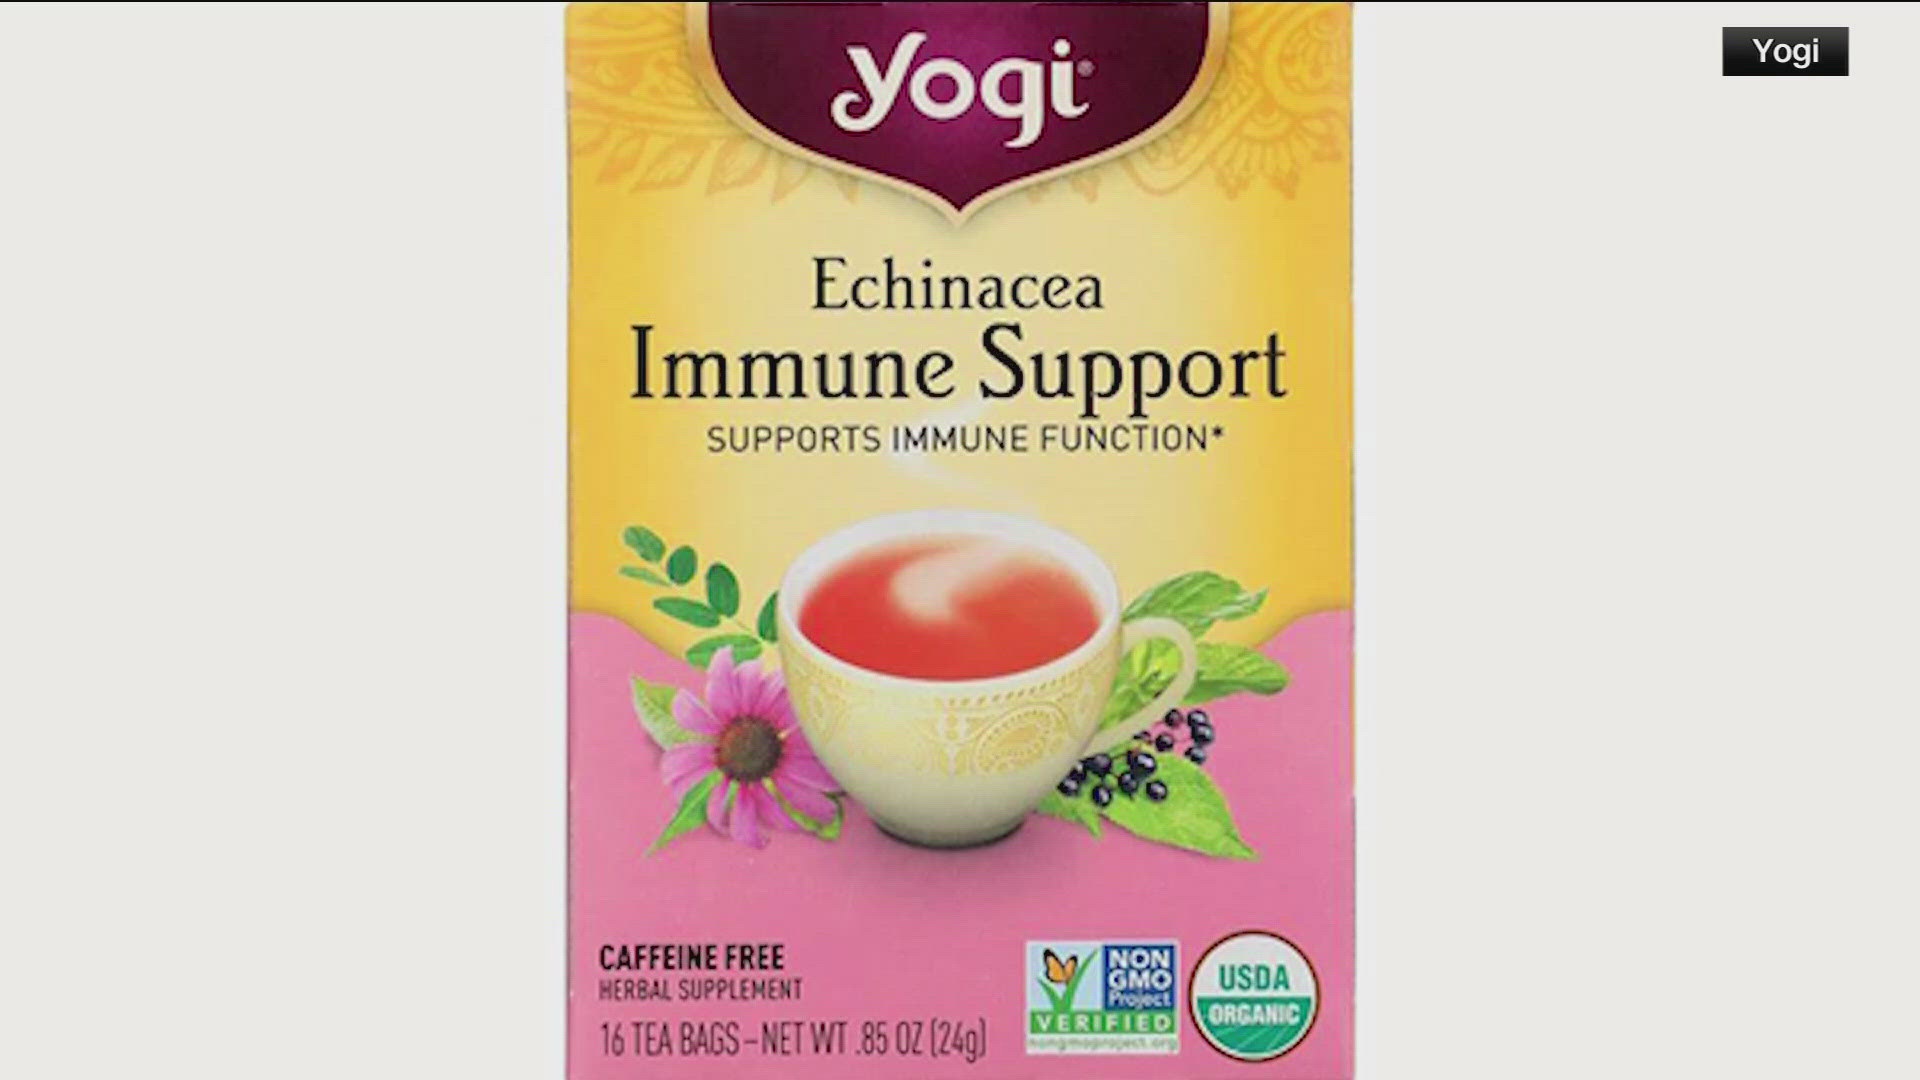 Yogi Immune Support tea bags were recalled due to pesticides detected in some of them.